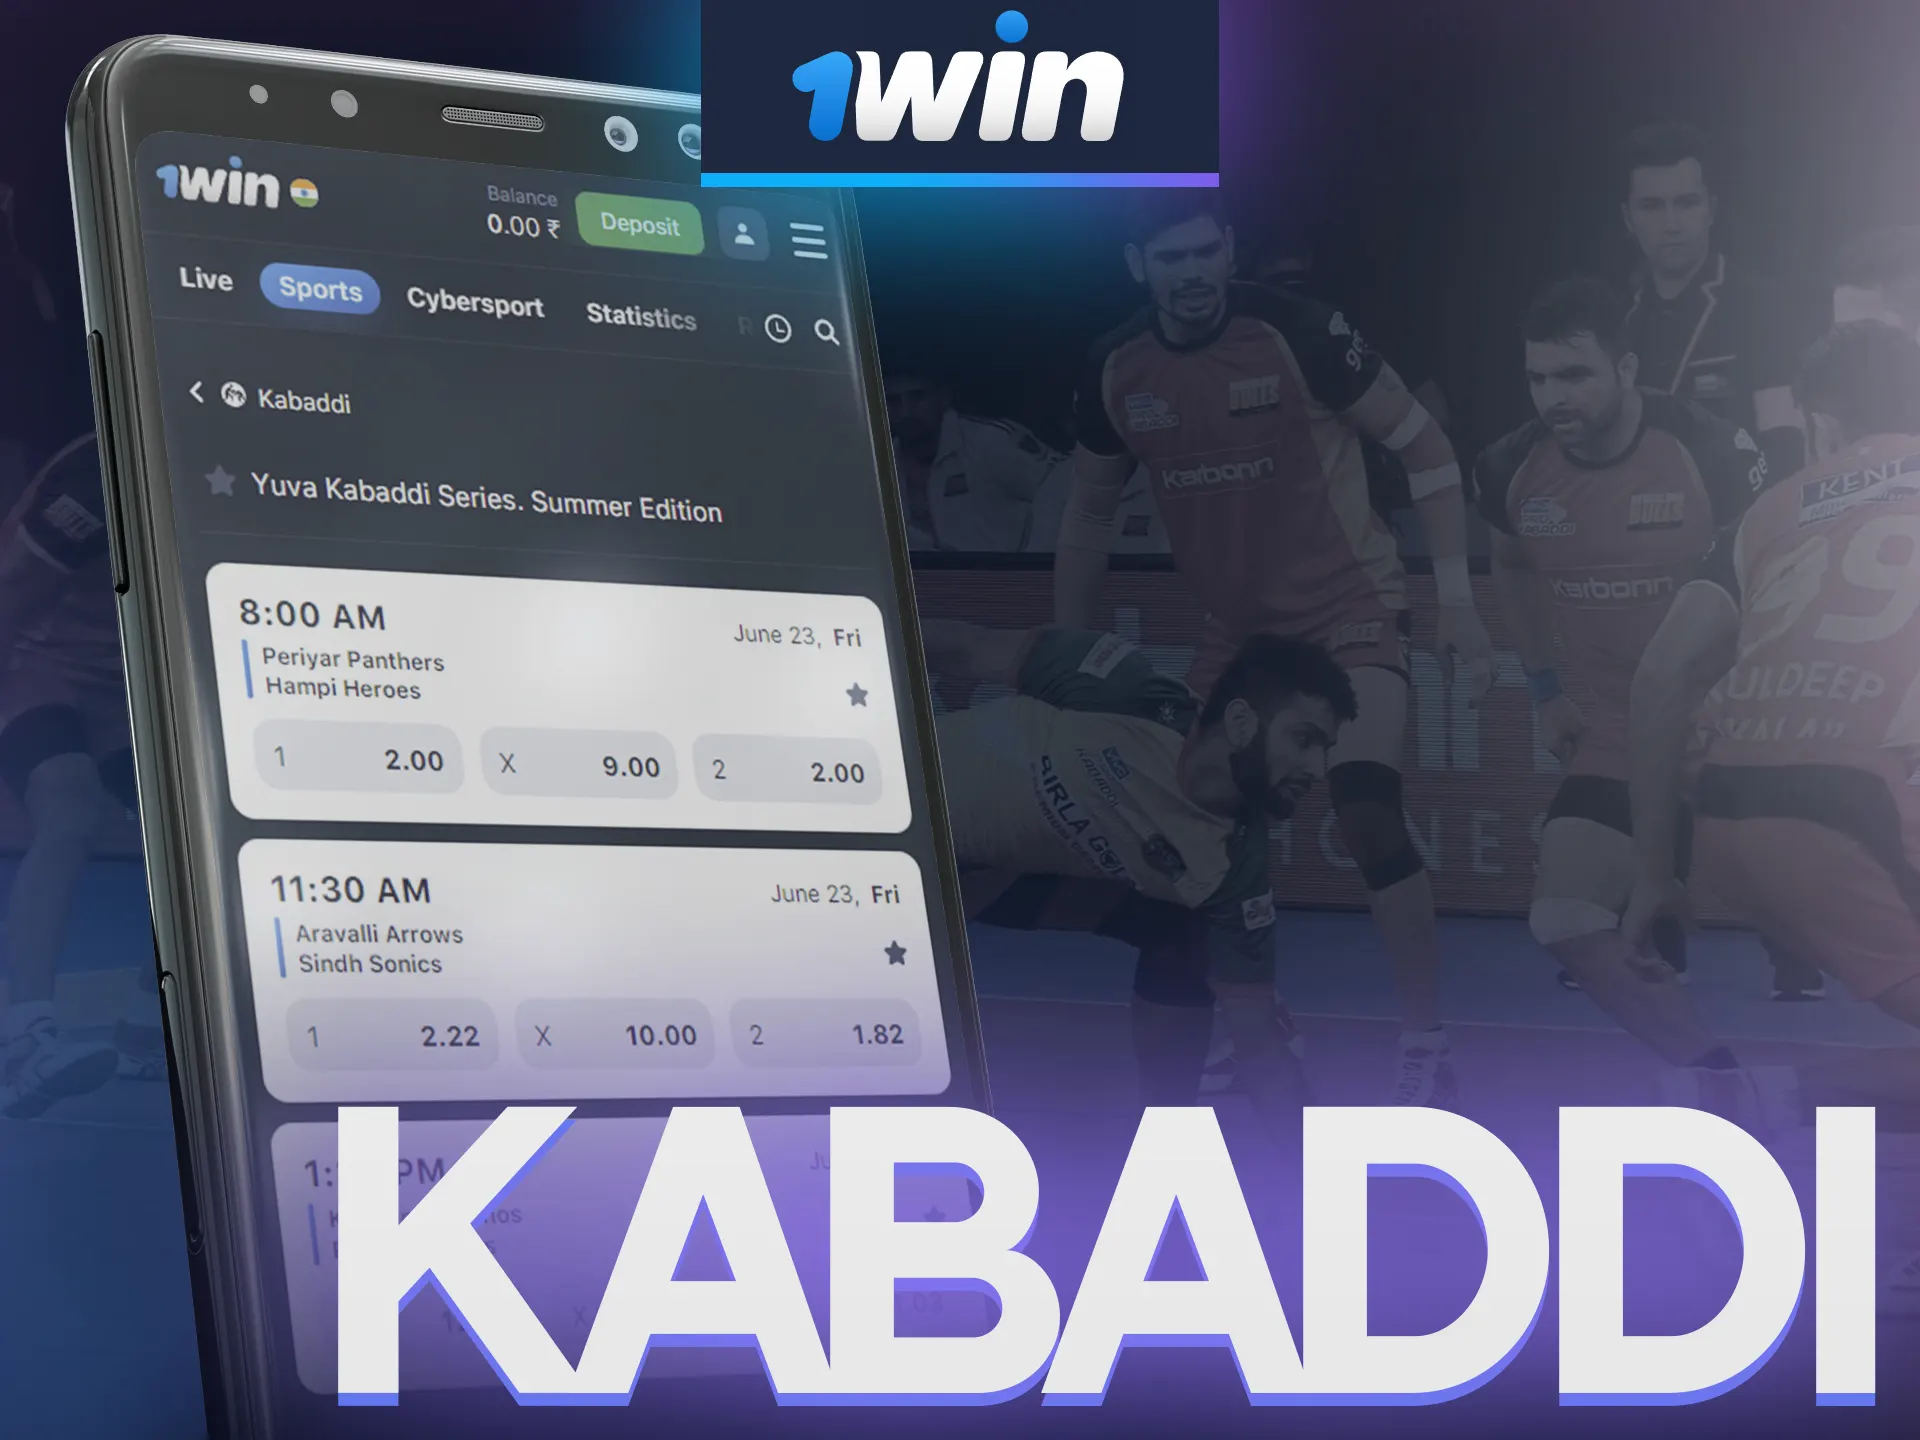 In the 1Win app you can bet on kabaddi.